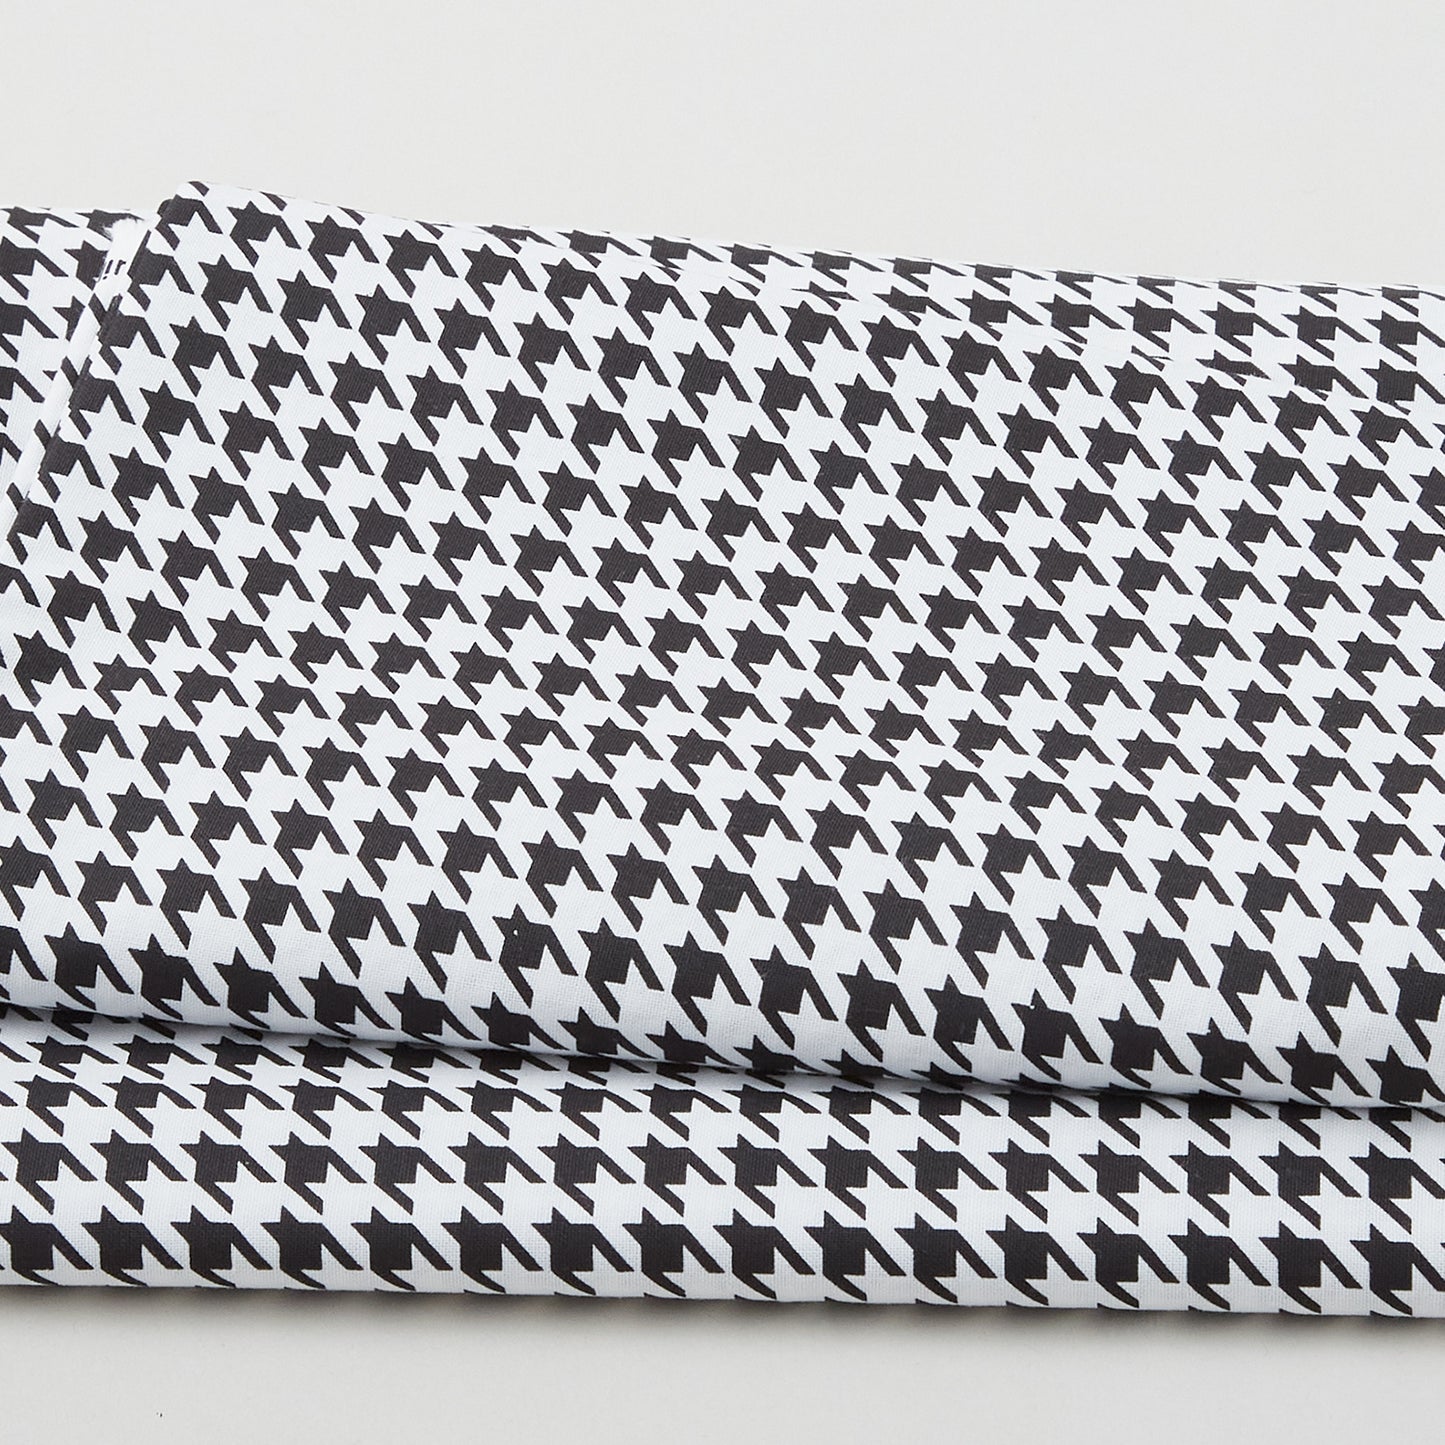 Polka & Plaid Party - Houndstooth Black/White 3 Yard Cut Primary Image